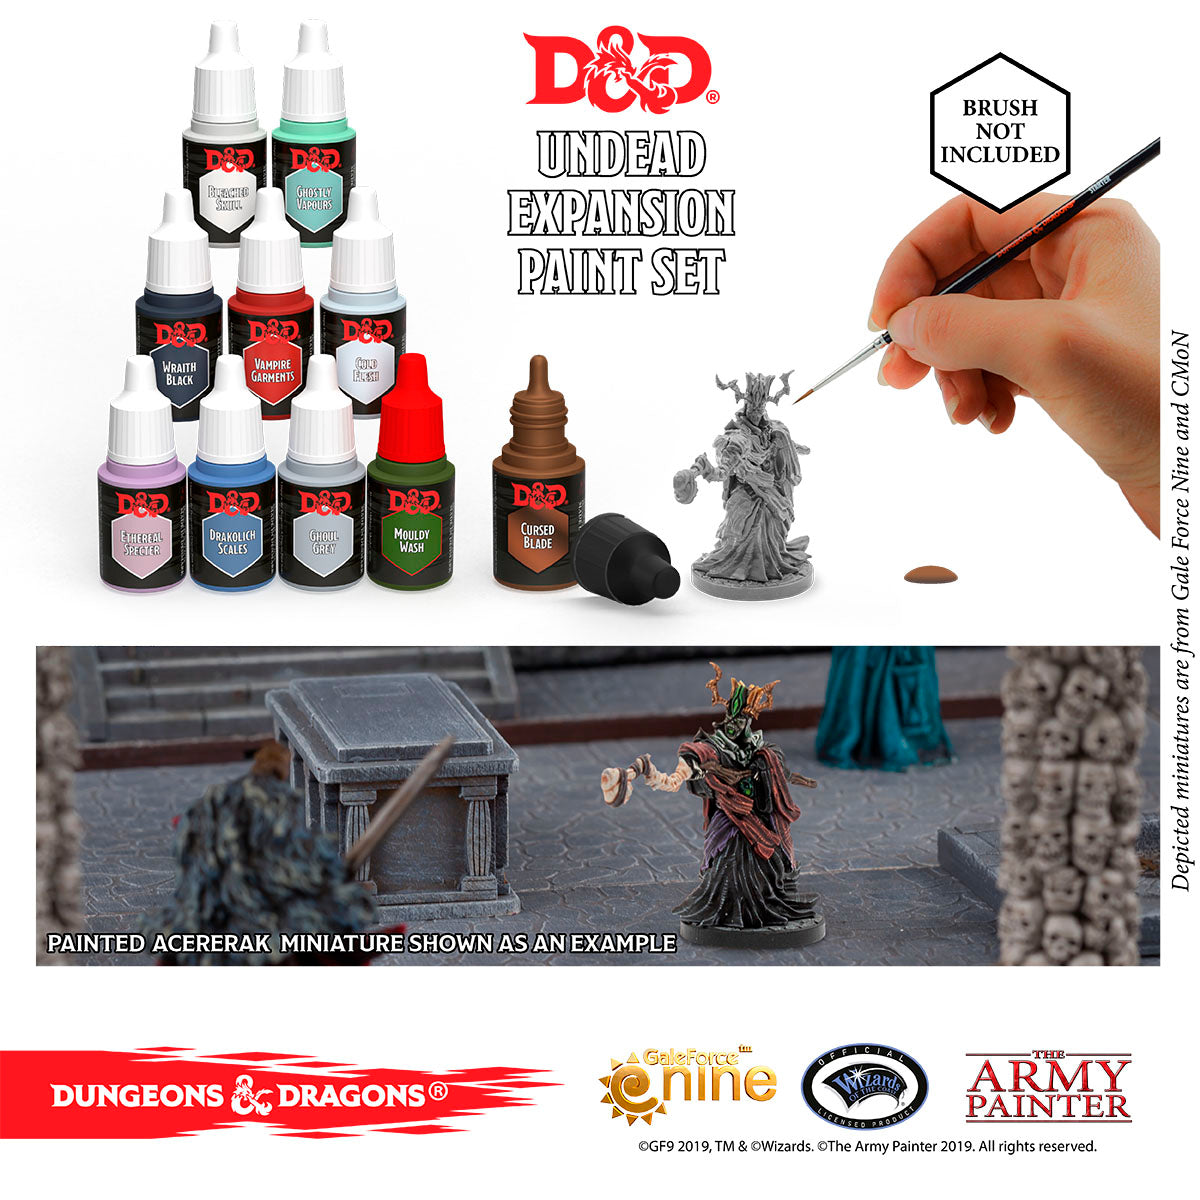 Find The official D&D paint, brushes & sets here